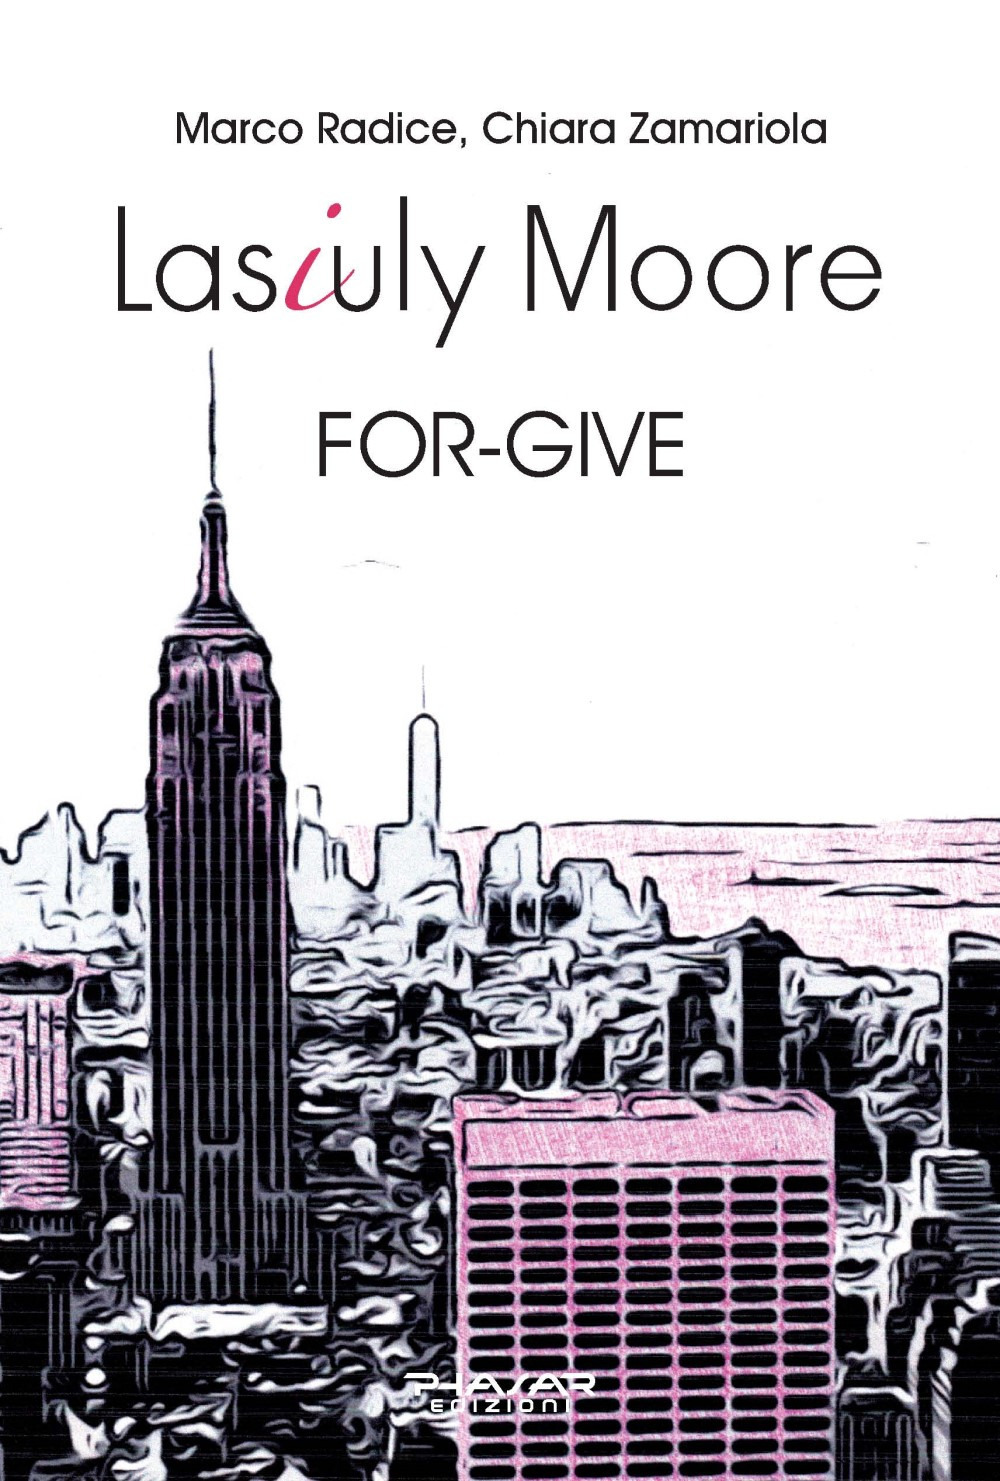 Lasiuly Moore. For-give